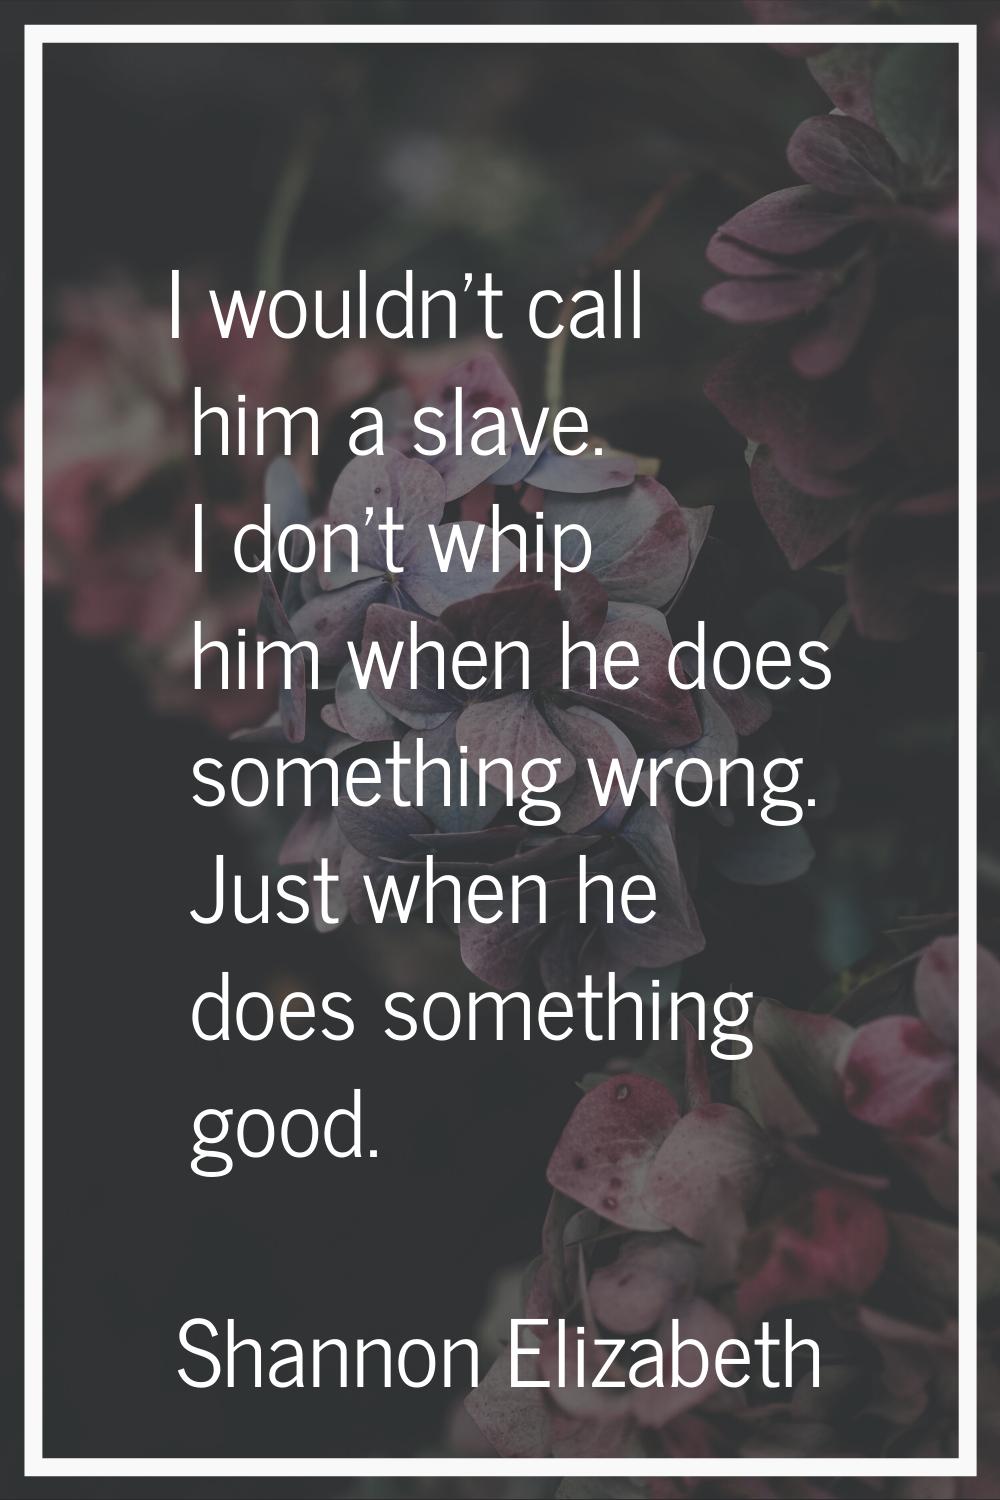 I wouldn't call him a slave. I don't whip him when he does something wrong. Just when he does somet